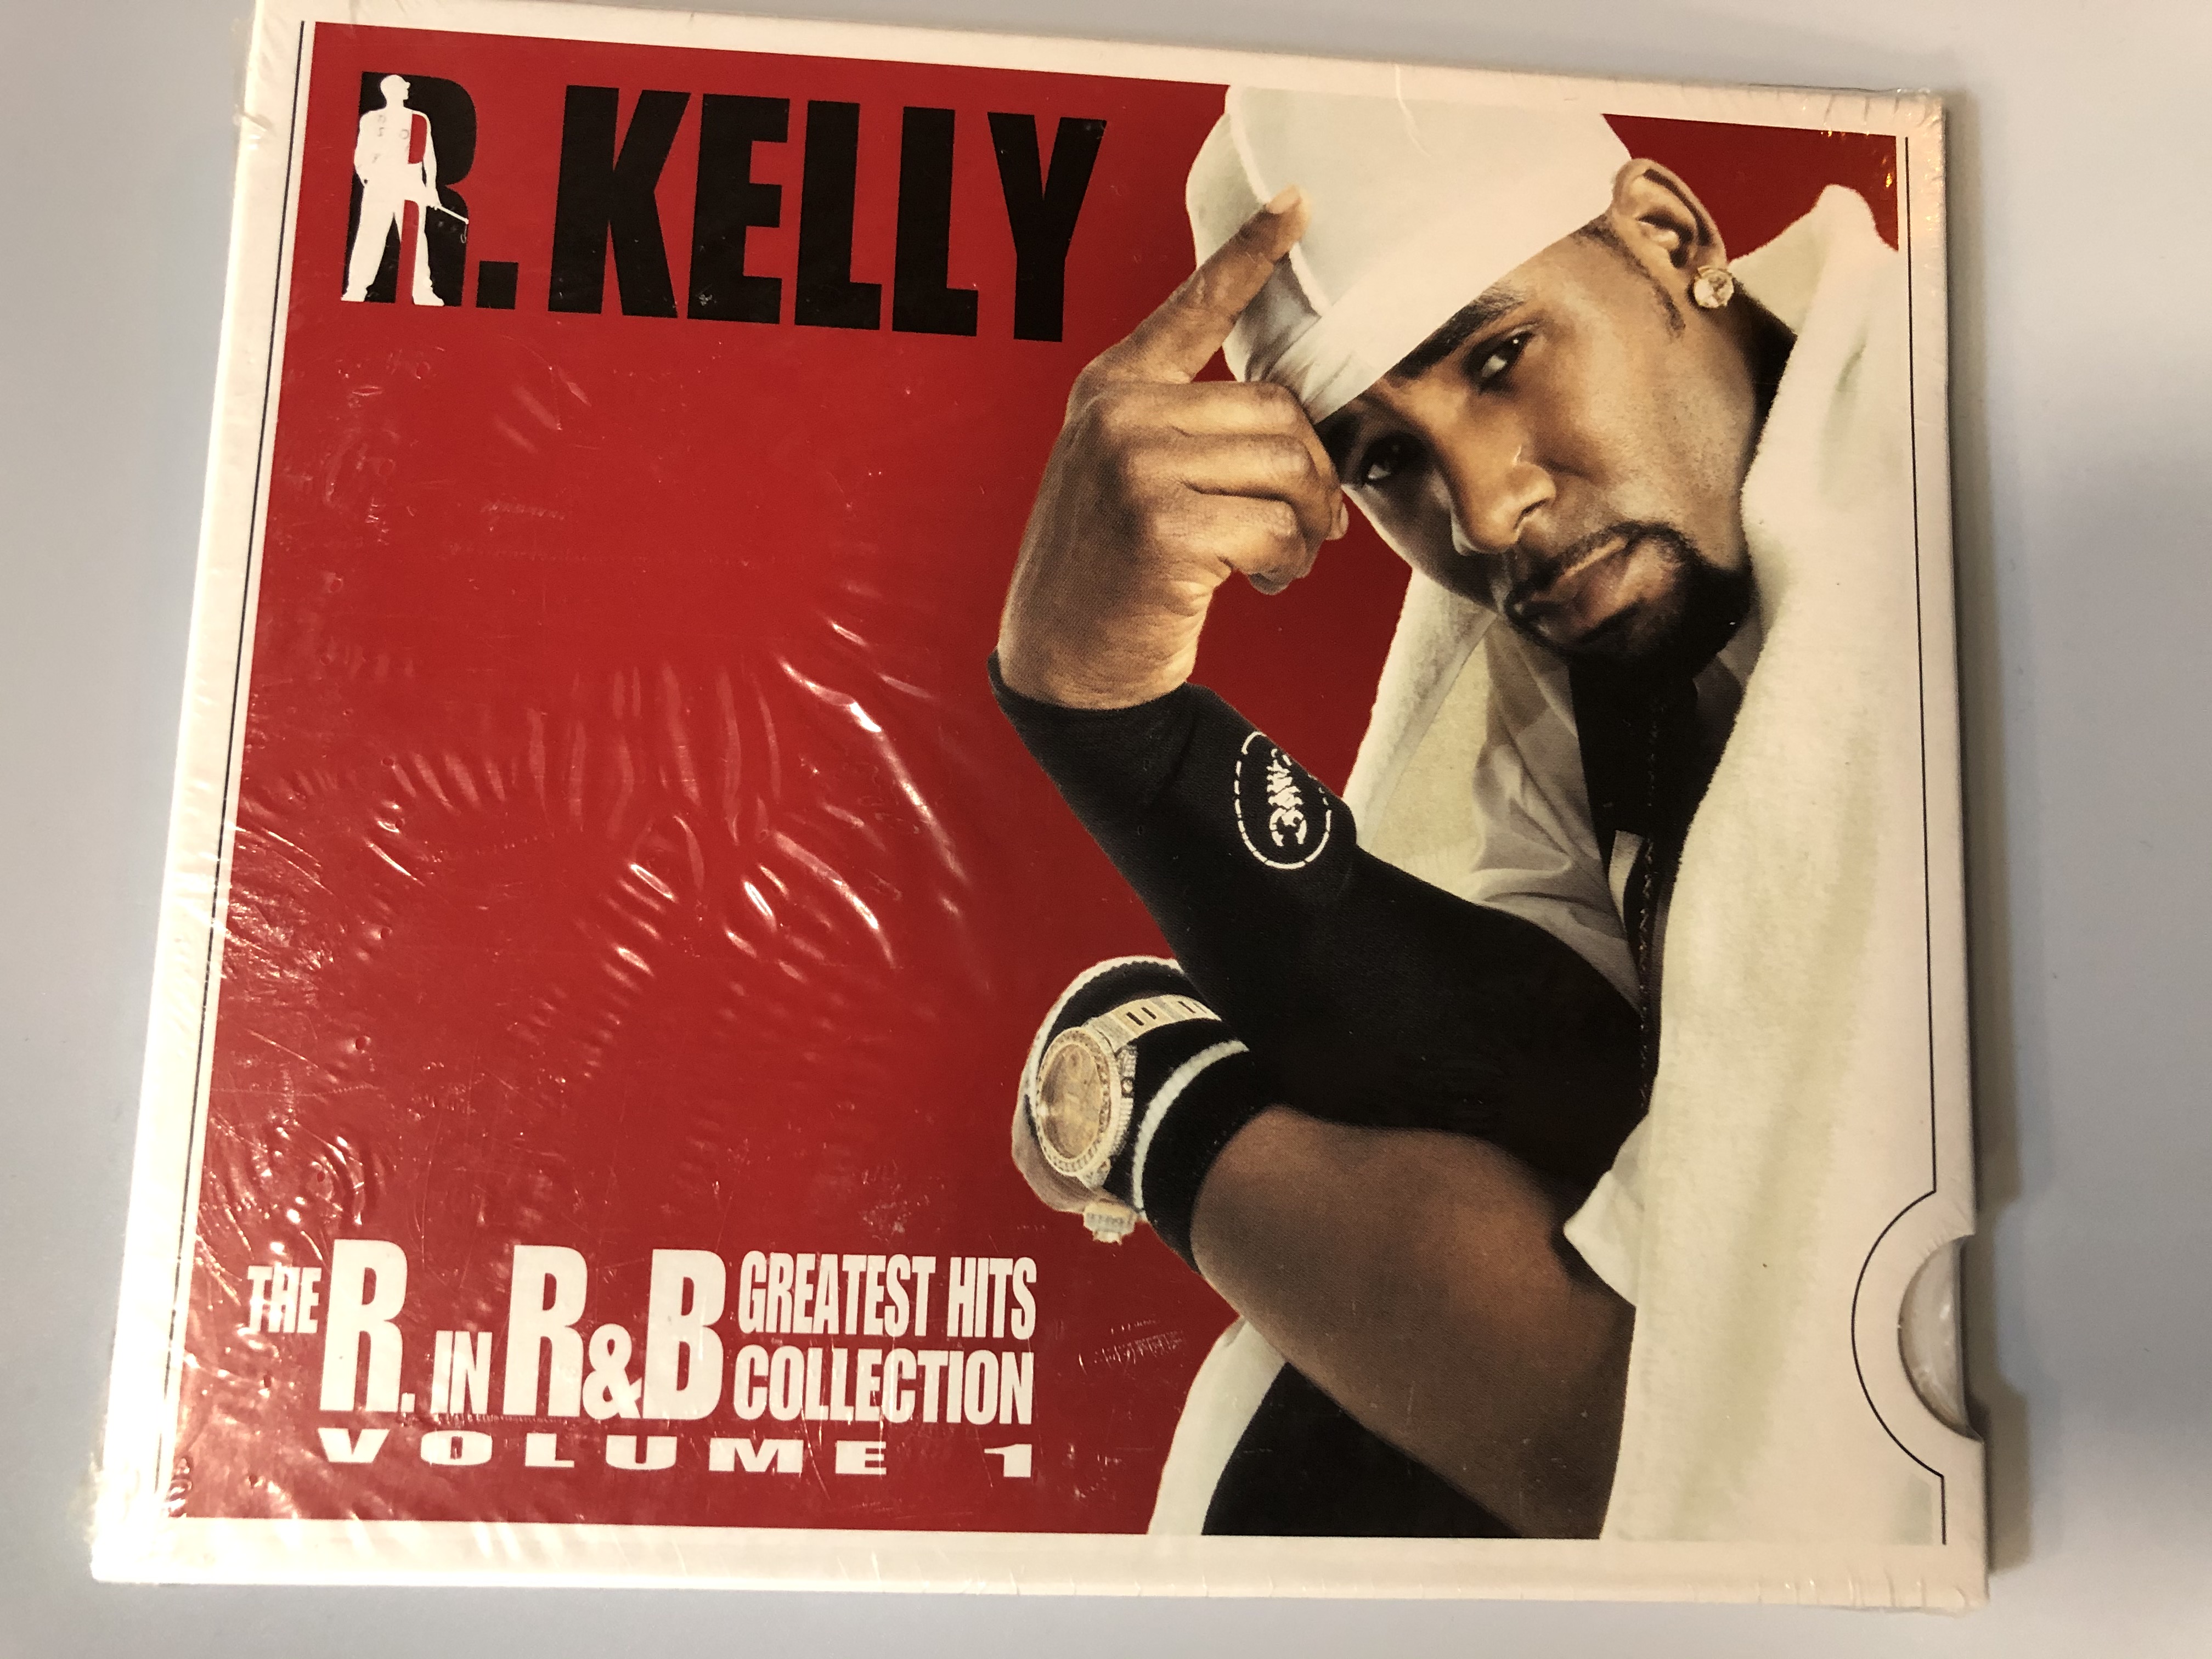 r.-kelly-the-r.-in-r-b-greatest-hits-collection-volume-1-jive-audio-cd-2007-88697046612-1-.jpg